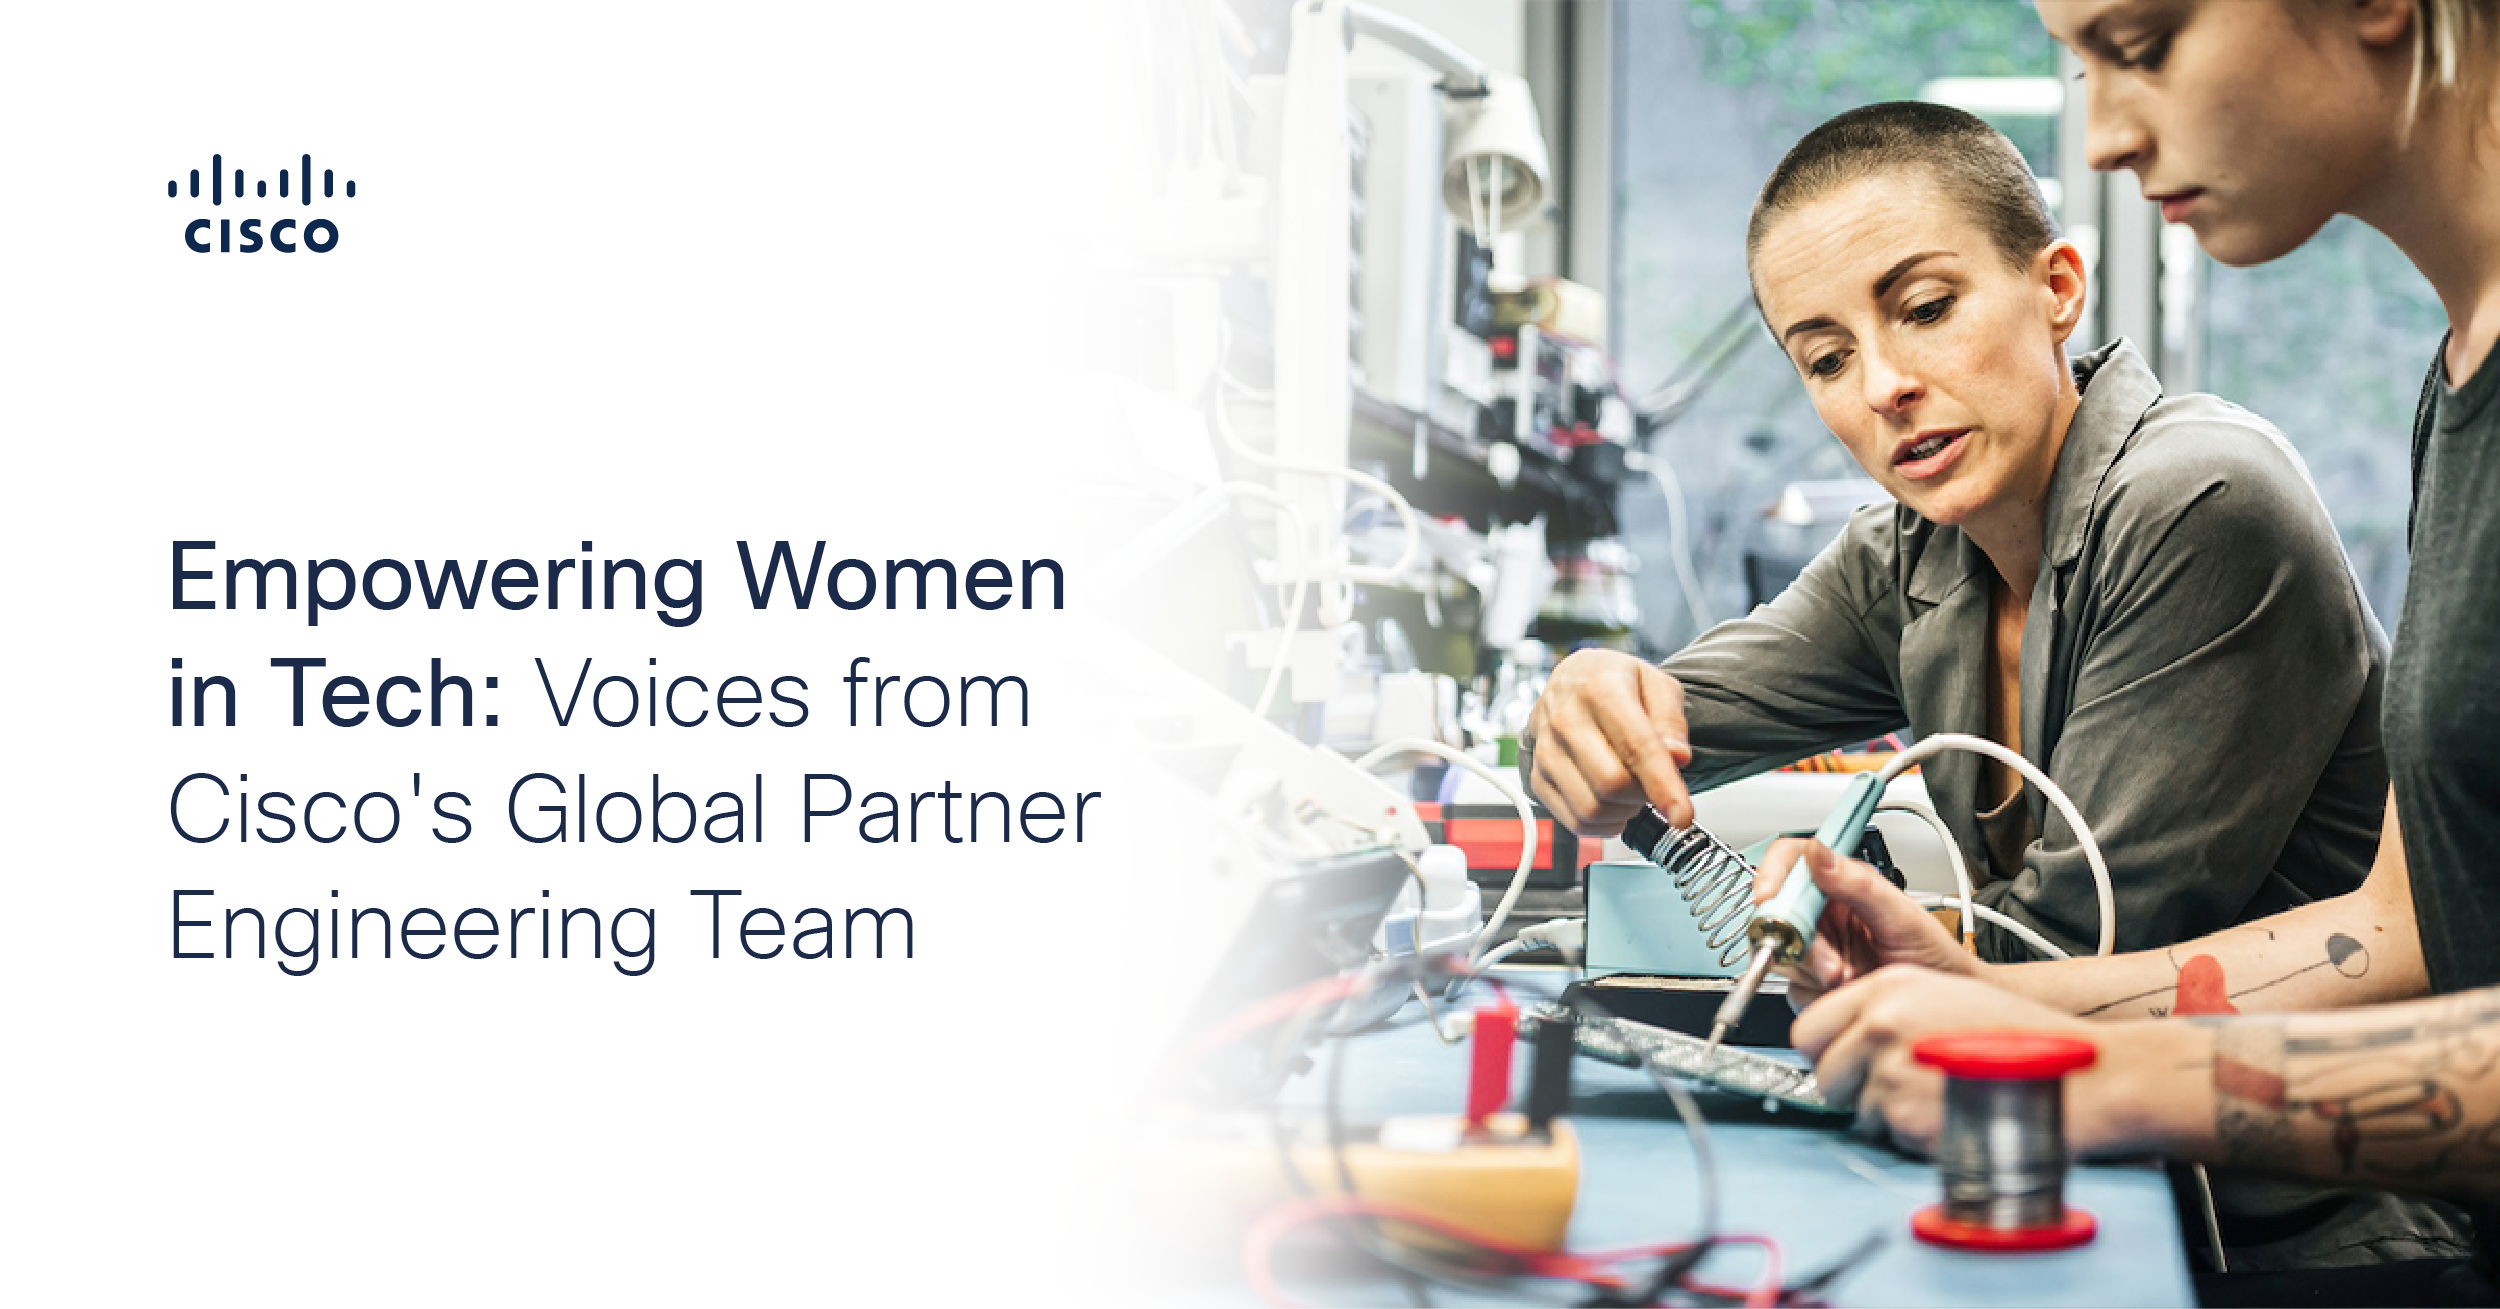 Empowering Women in Tech: Voices from Cisco's Global Partner Engineering Team